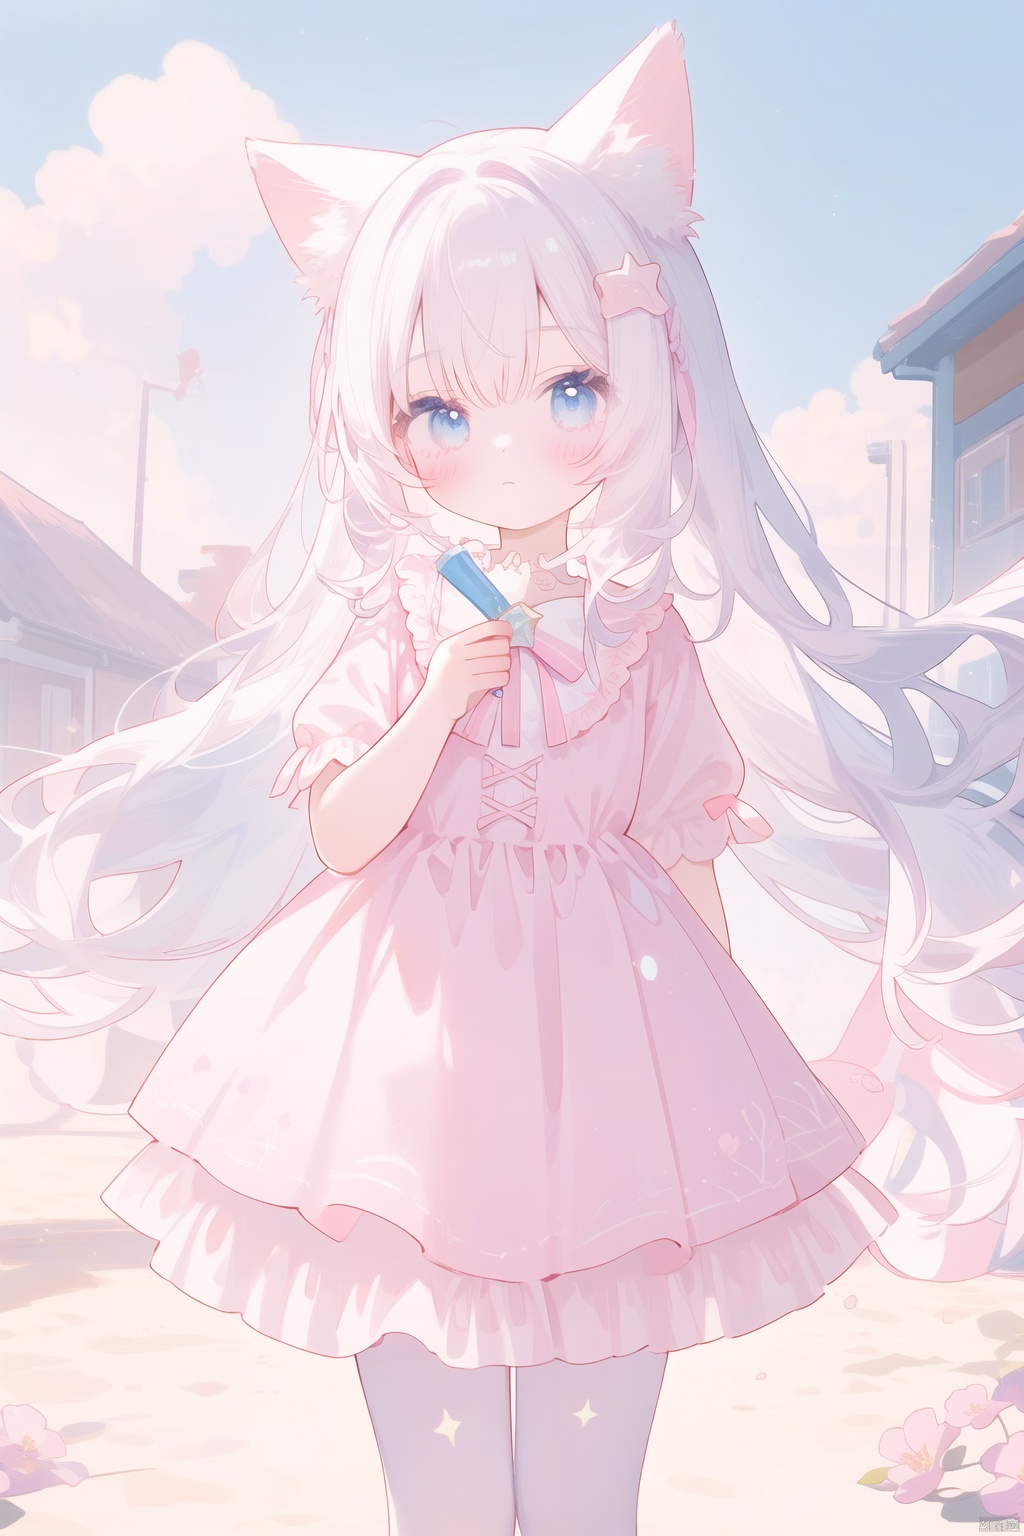  1 girl, solo, dress, standing, white background, expressionless, ((Pastel Kawaii)), pastel colors, dreamy, star hairclips, unicorns, clouds, kawaii, harajuku style clothes, ribbons, soft filter, cute colors, sparkles, angelic elements, stars, pastel colored hair, bandages, baggy clothes, street fashion,hide left hand,white hair,big pink ribbon, cuteloli, LeotardGirl, high quality body photography of a young girl, Russian girl, 1girl, 17yo, long hair, (floral LeotardGirl, LaceSkirt), detailed hair ornament,beautiful detailed eyes,beautiful and aesthetic,super high resolution,Vivid colors, Vivid colors, Sharp focus, Physically-based rendering,[[fullbody]],
, ears down